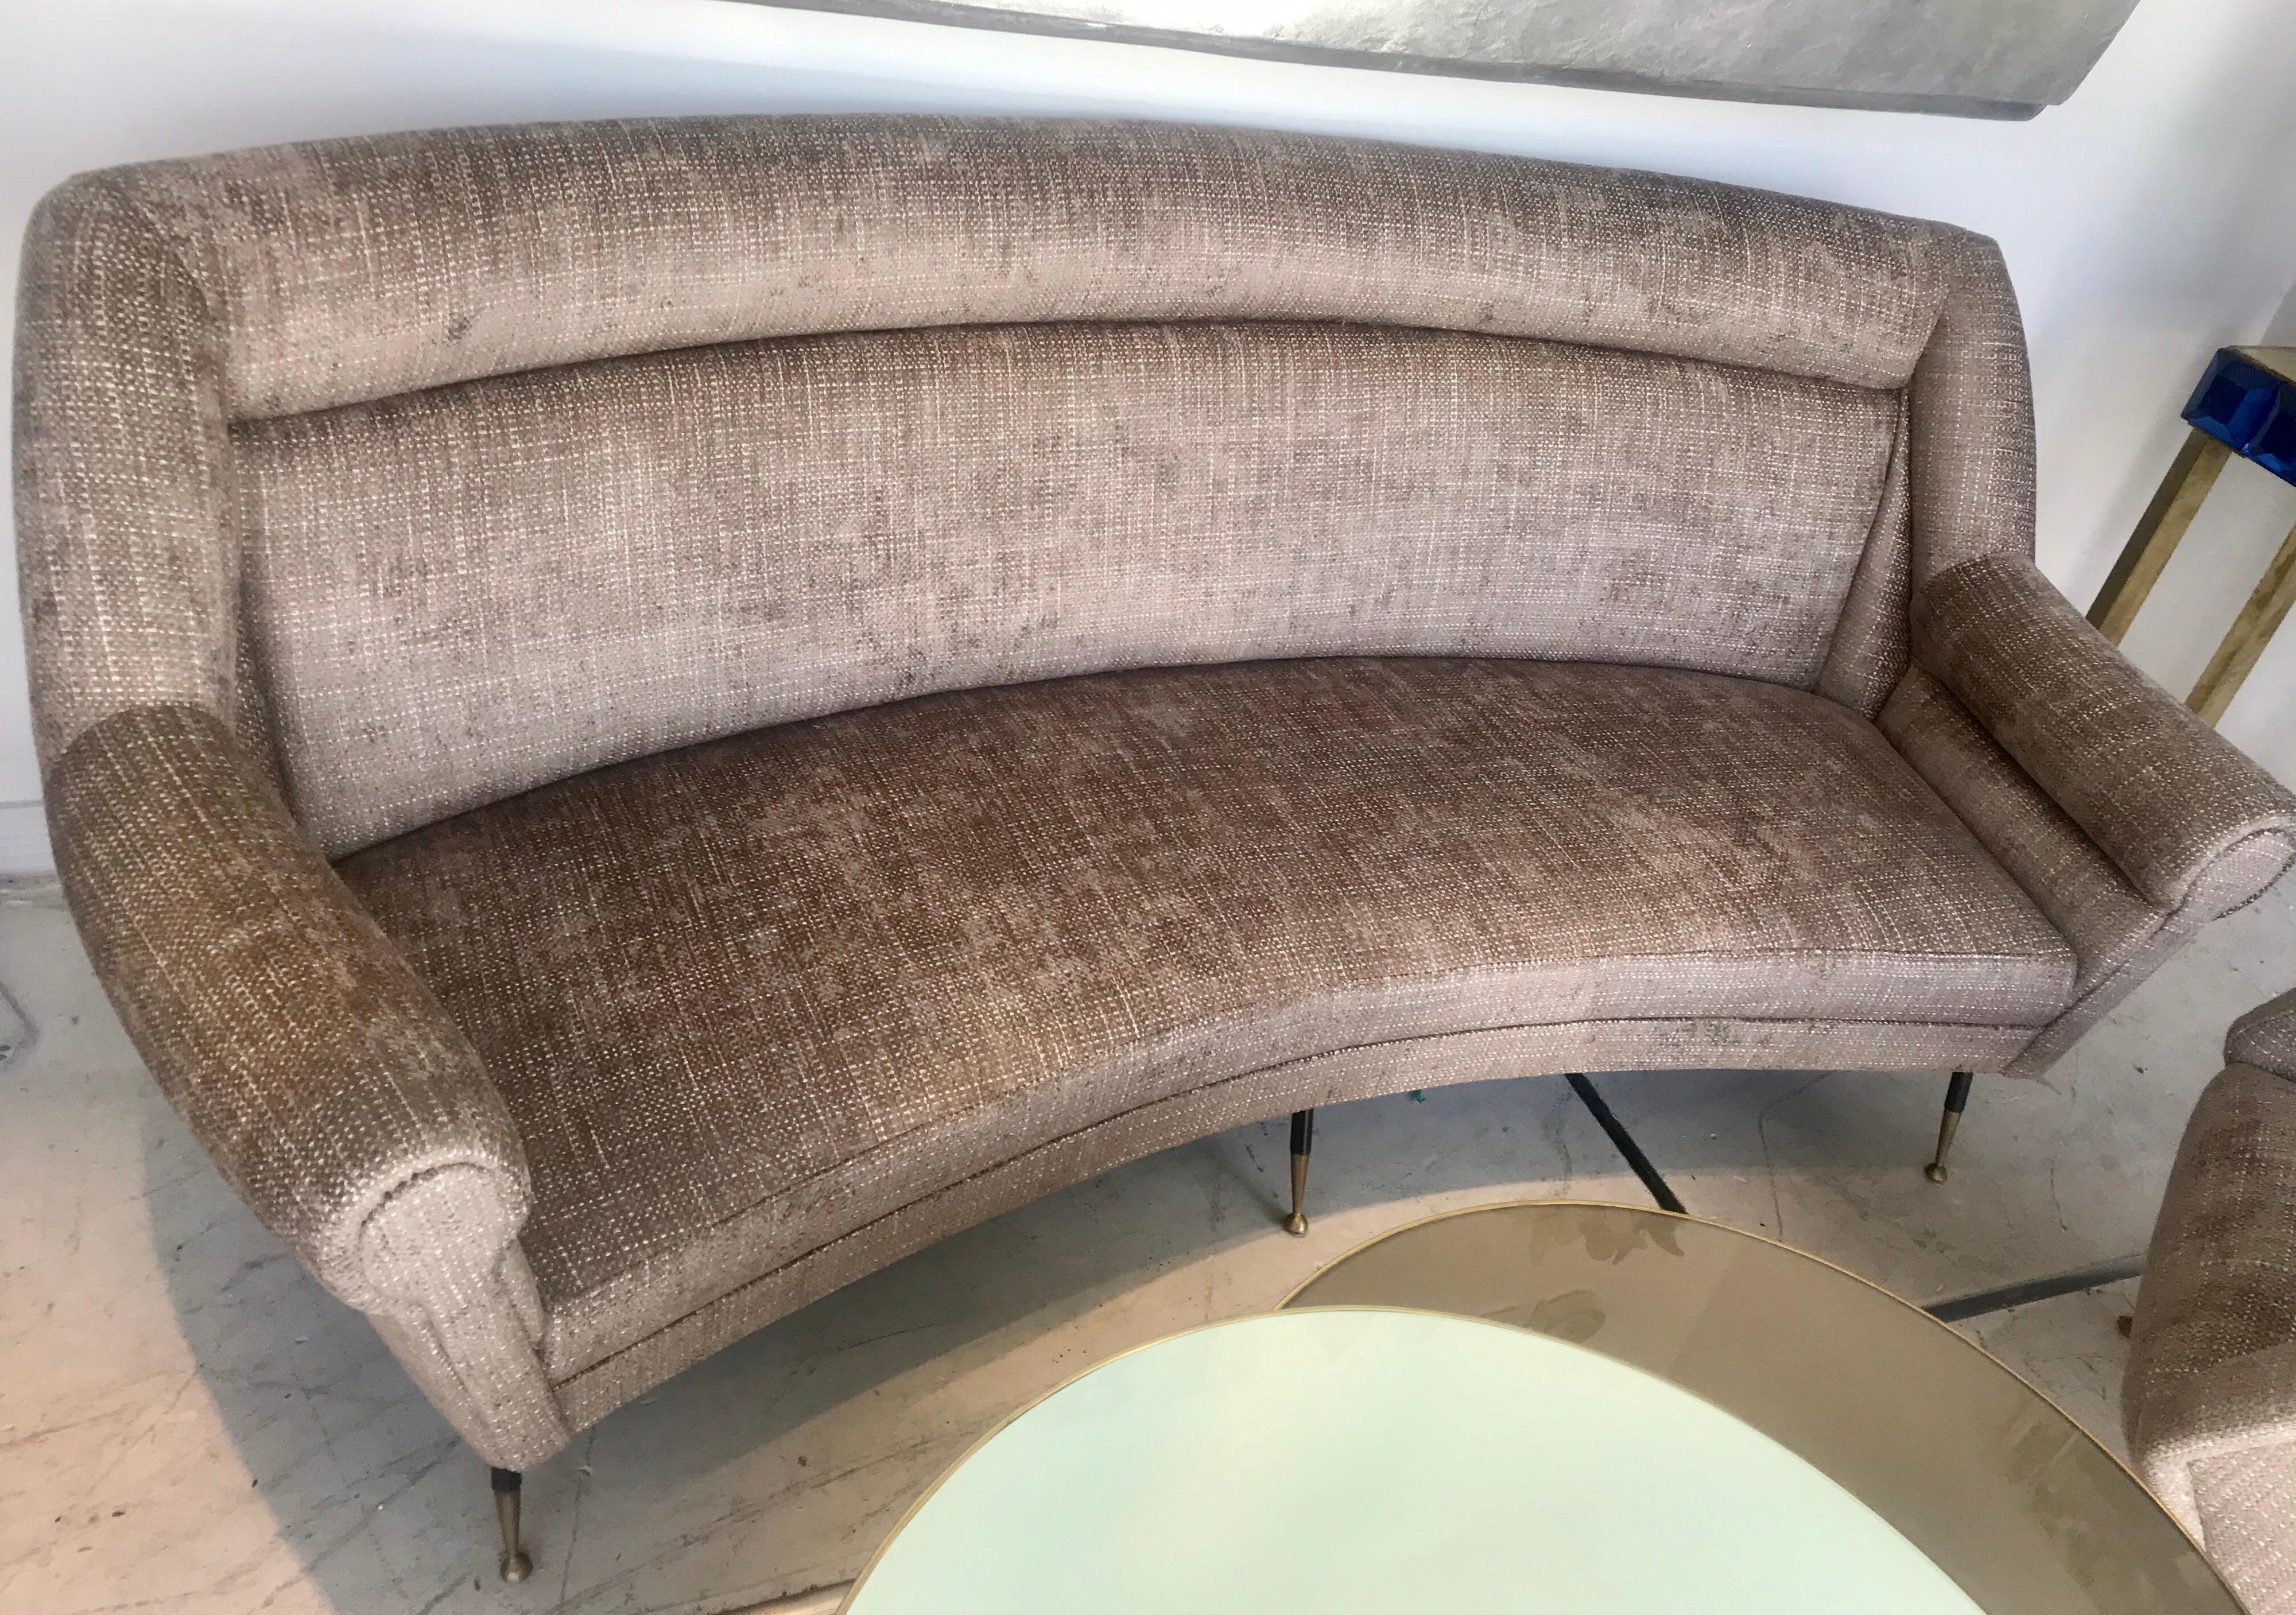 20th Century Midcentury Italian Curved Sofa in the style of Gio Ponti, circa 1958 For Sale